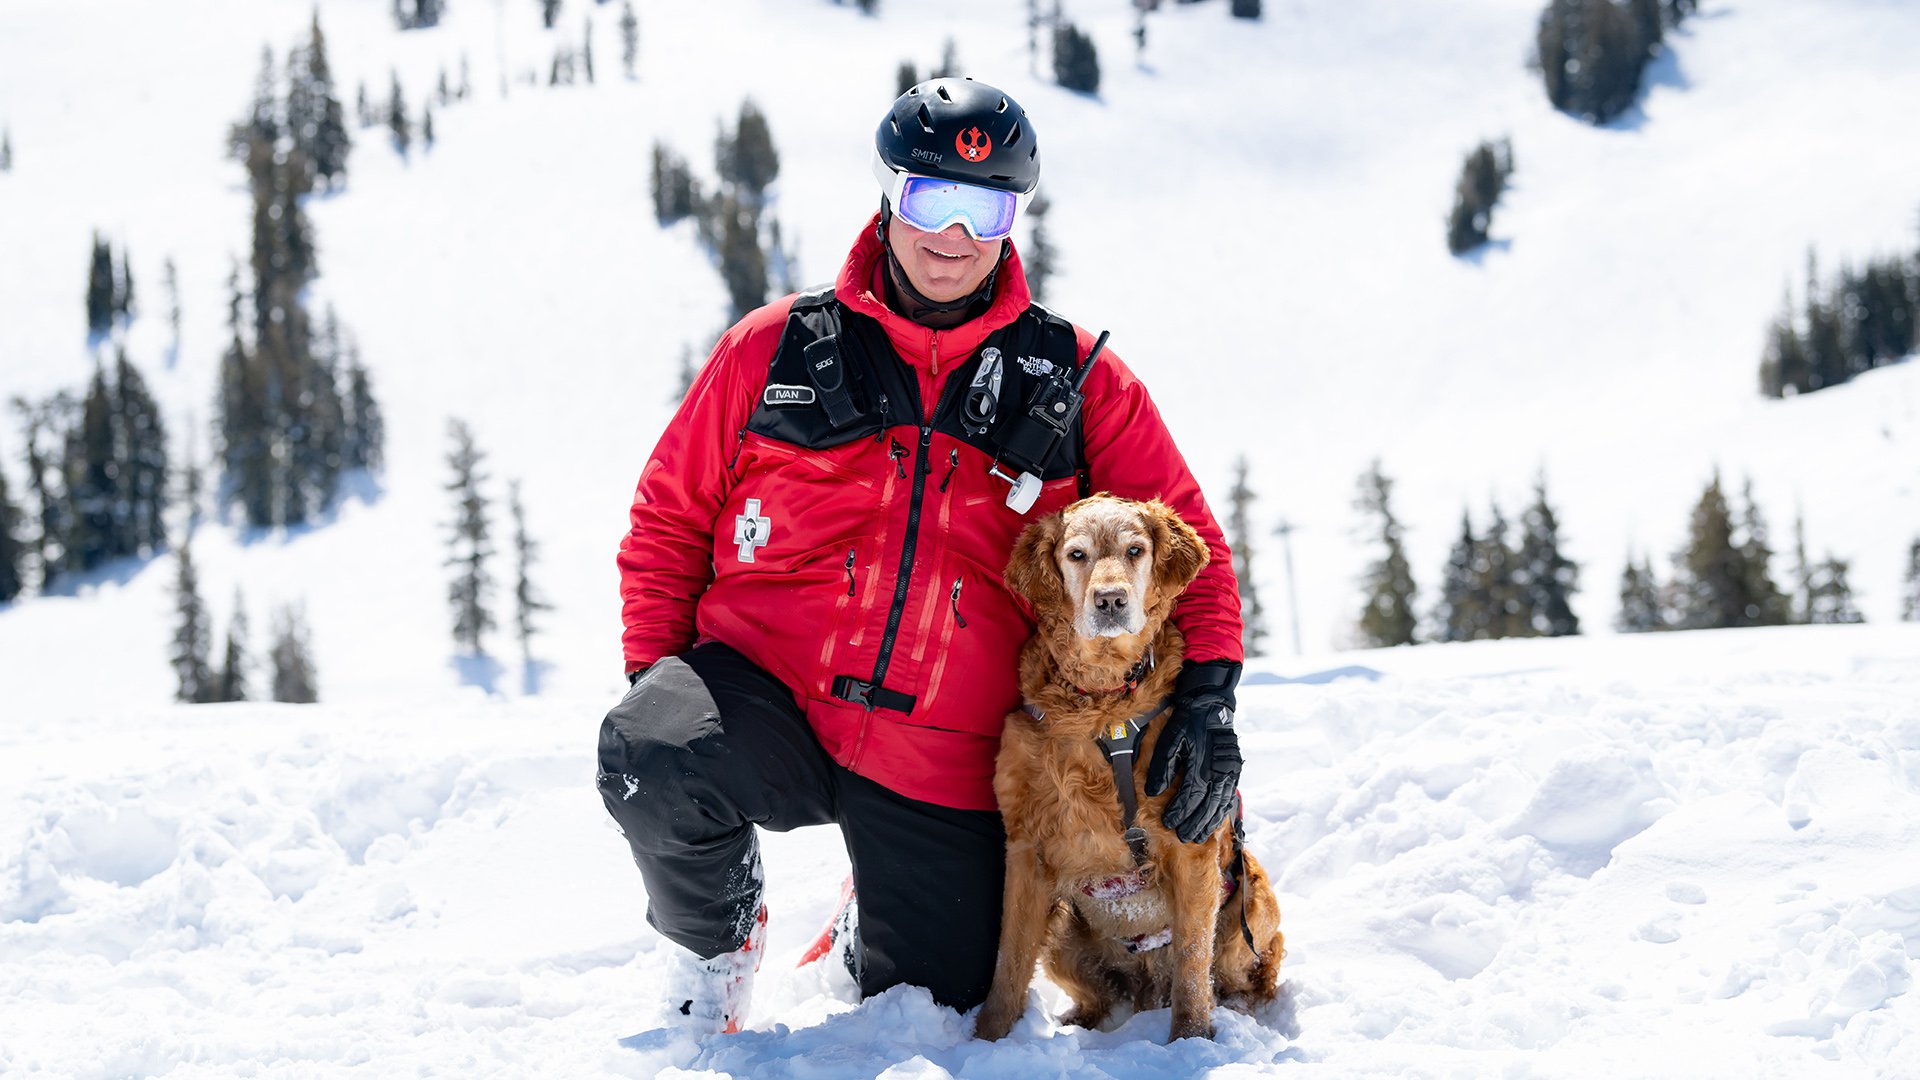 Featured image showing a safety guide and an avalanche dog at Palisades Tahoe